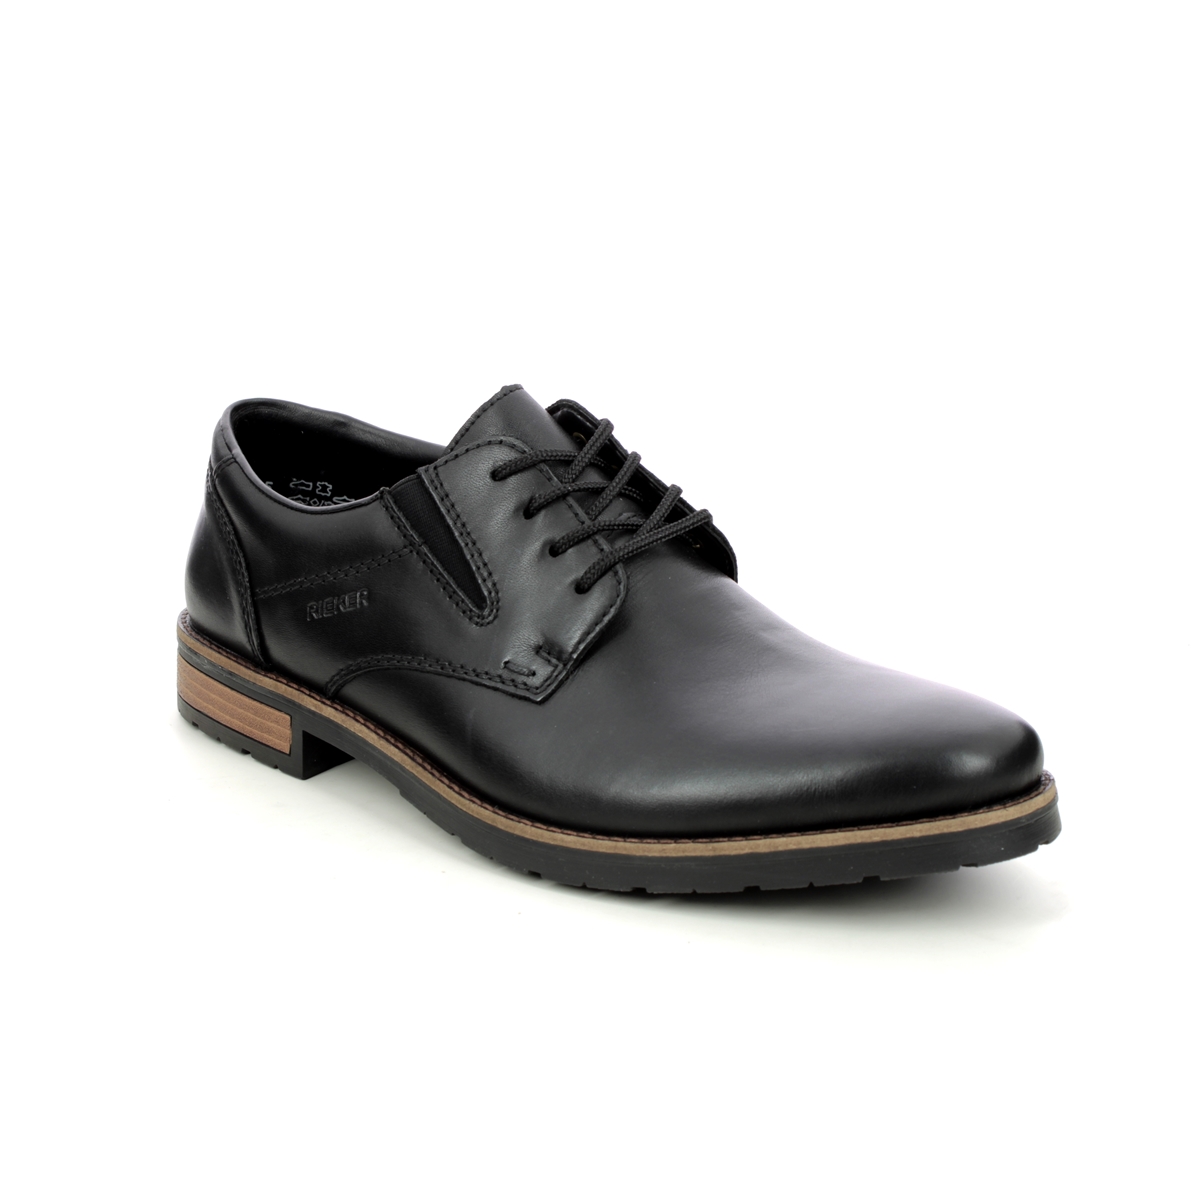 Rieker 14621-00 Black Mens formal shoes in a Plain Leather in Size 40